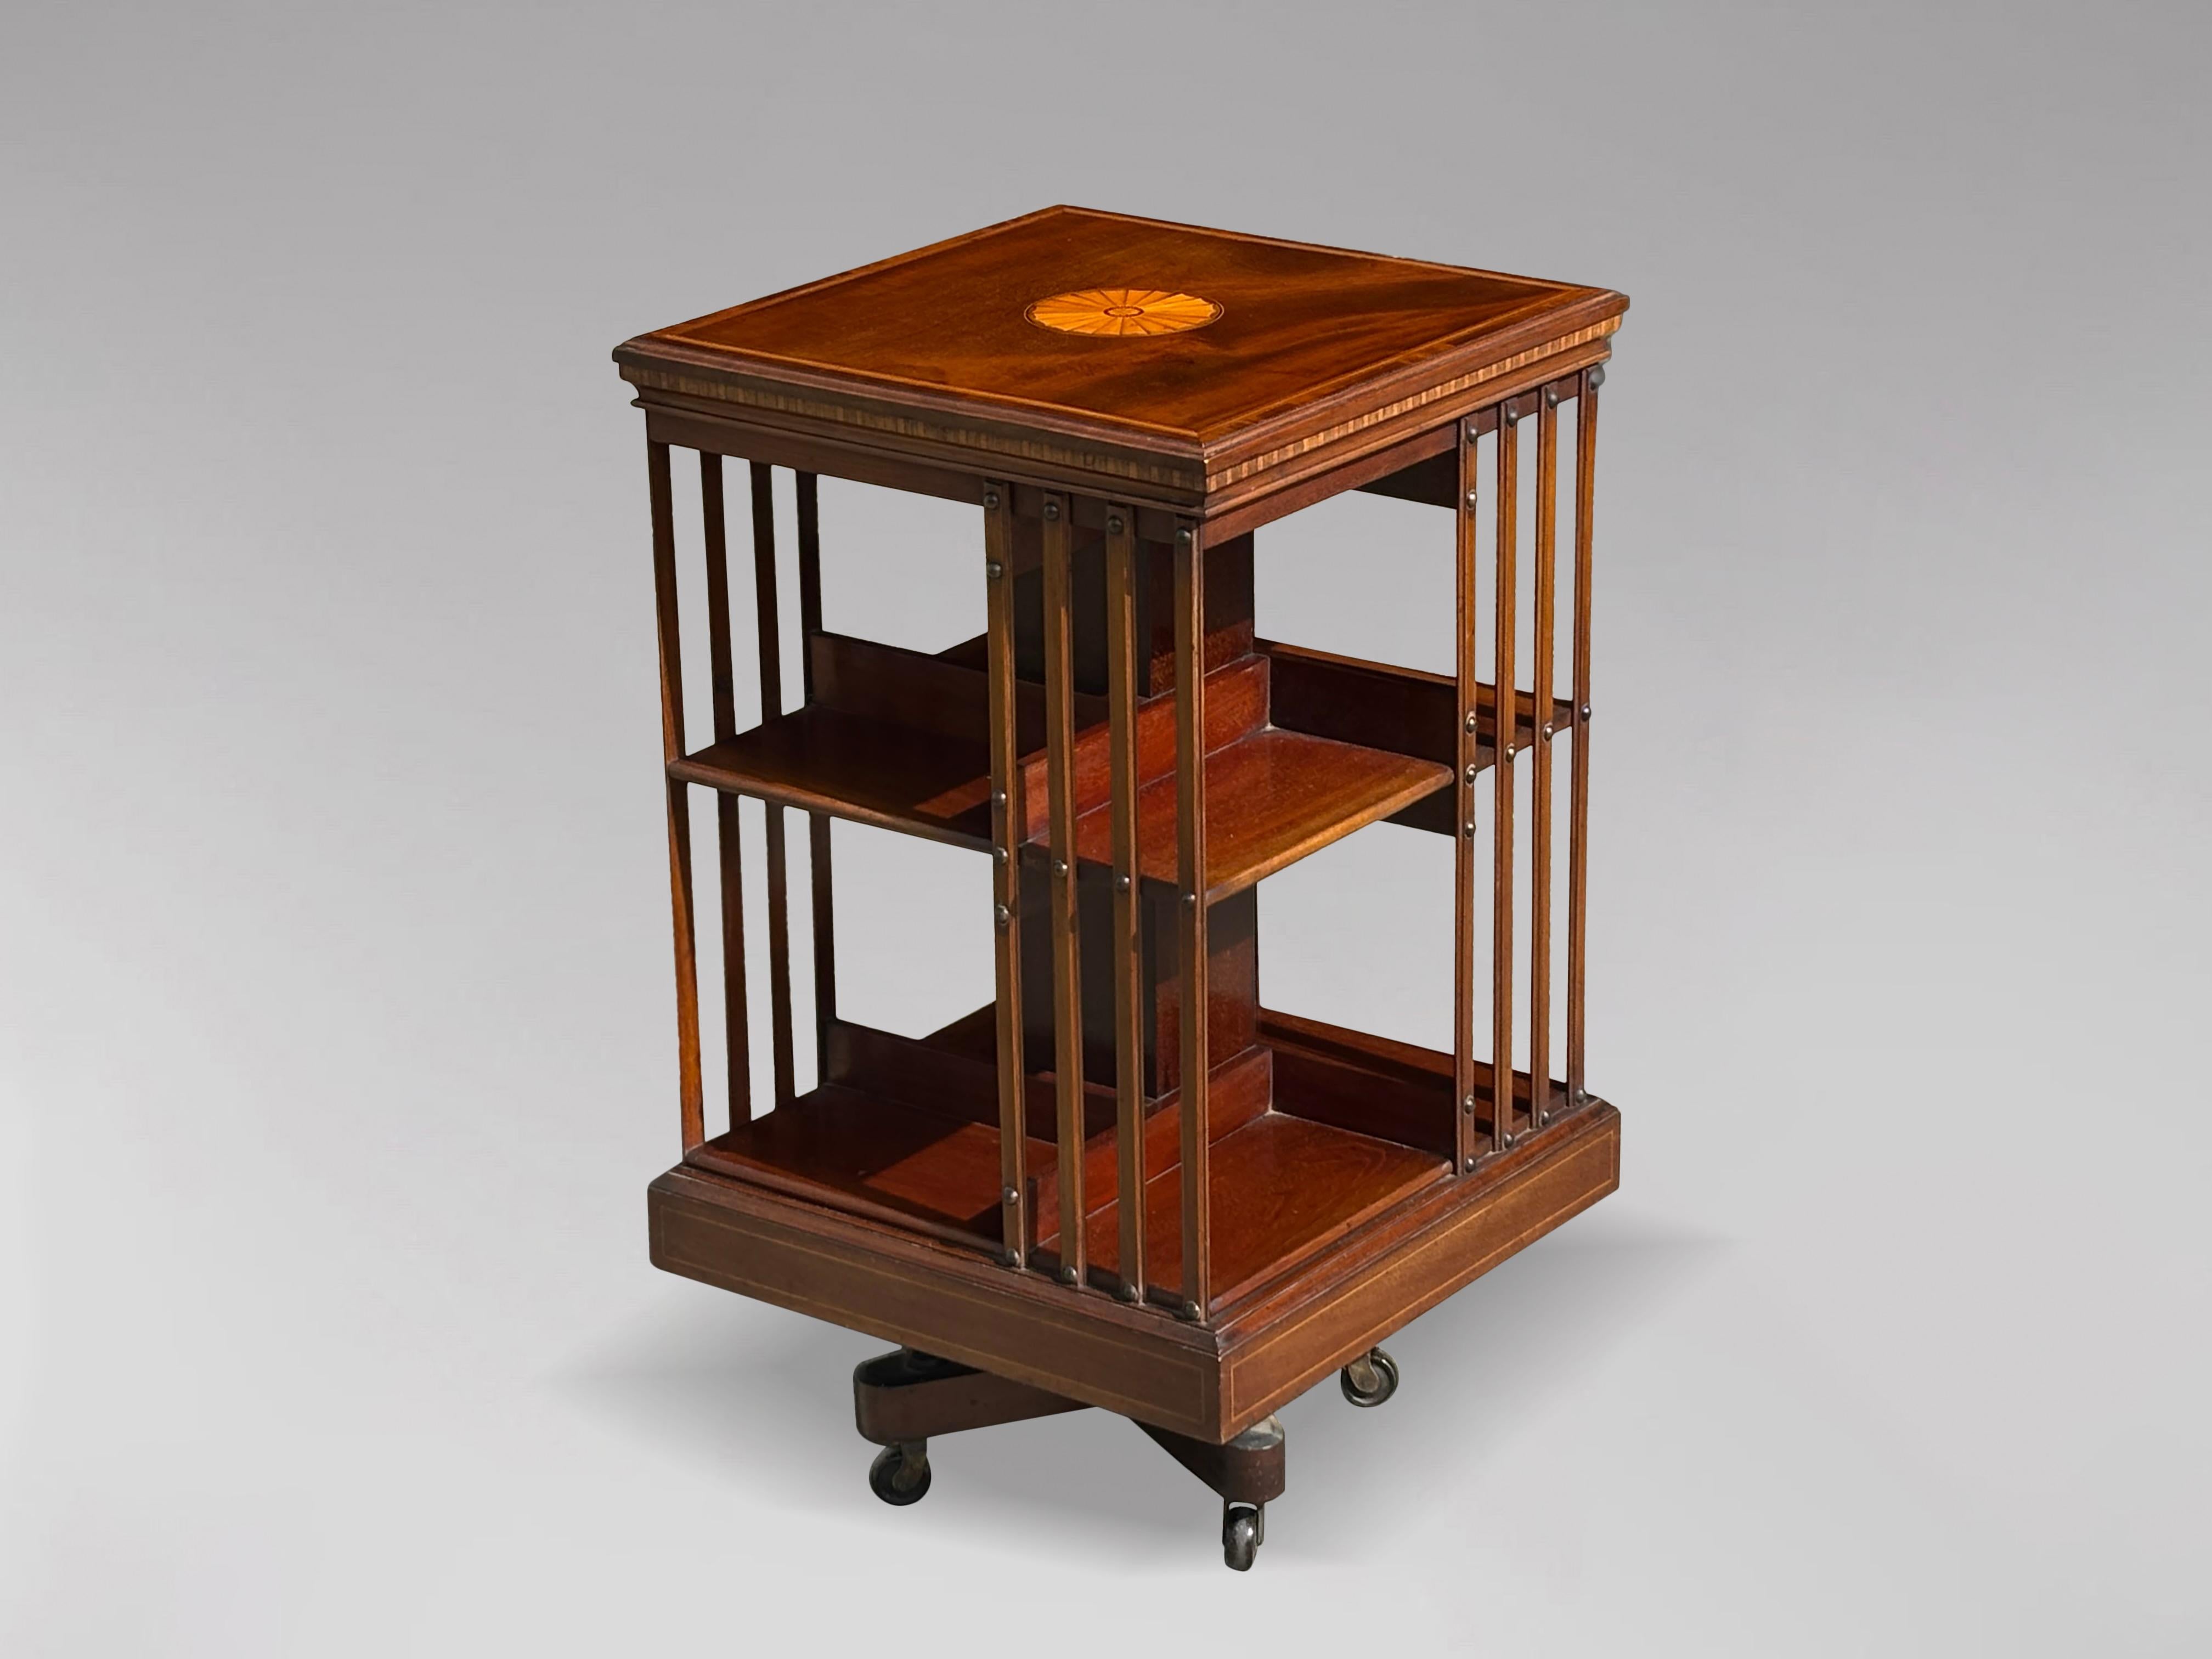 An attractive 19th century mahogany revolving bookcase with slatted sides, marquetry inlaid top with a chequered cross banded moulded edge, above two-tiered bookshelf with quarter sections divided by inlaid slats running from top to the base